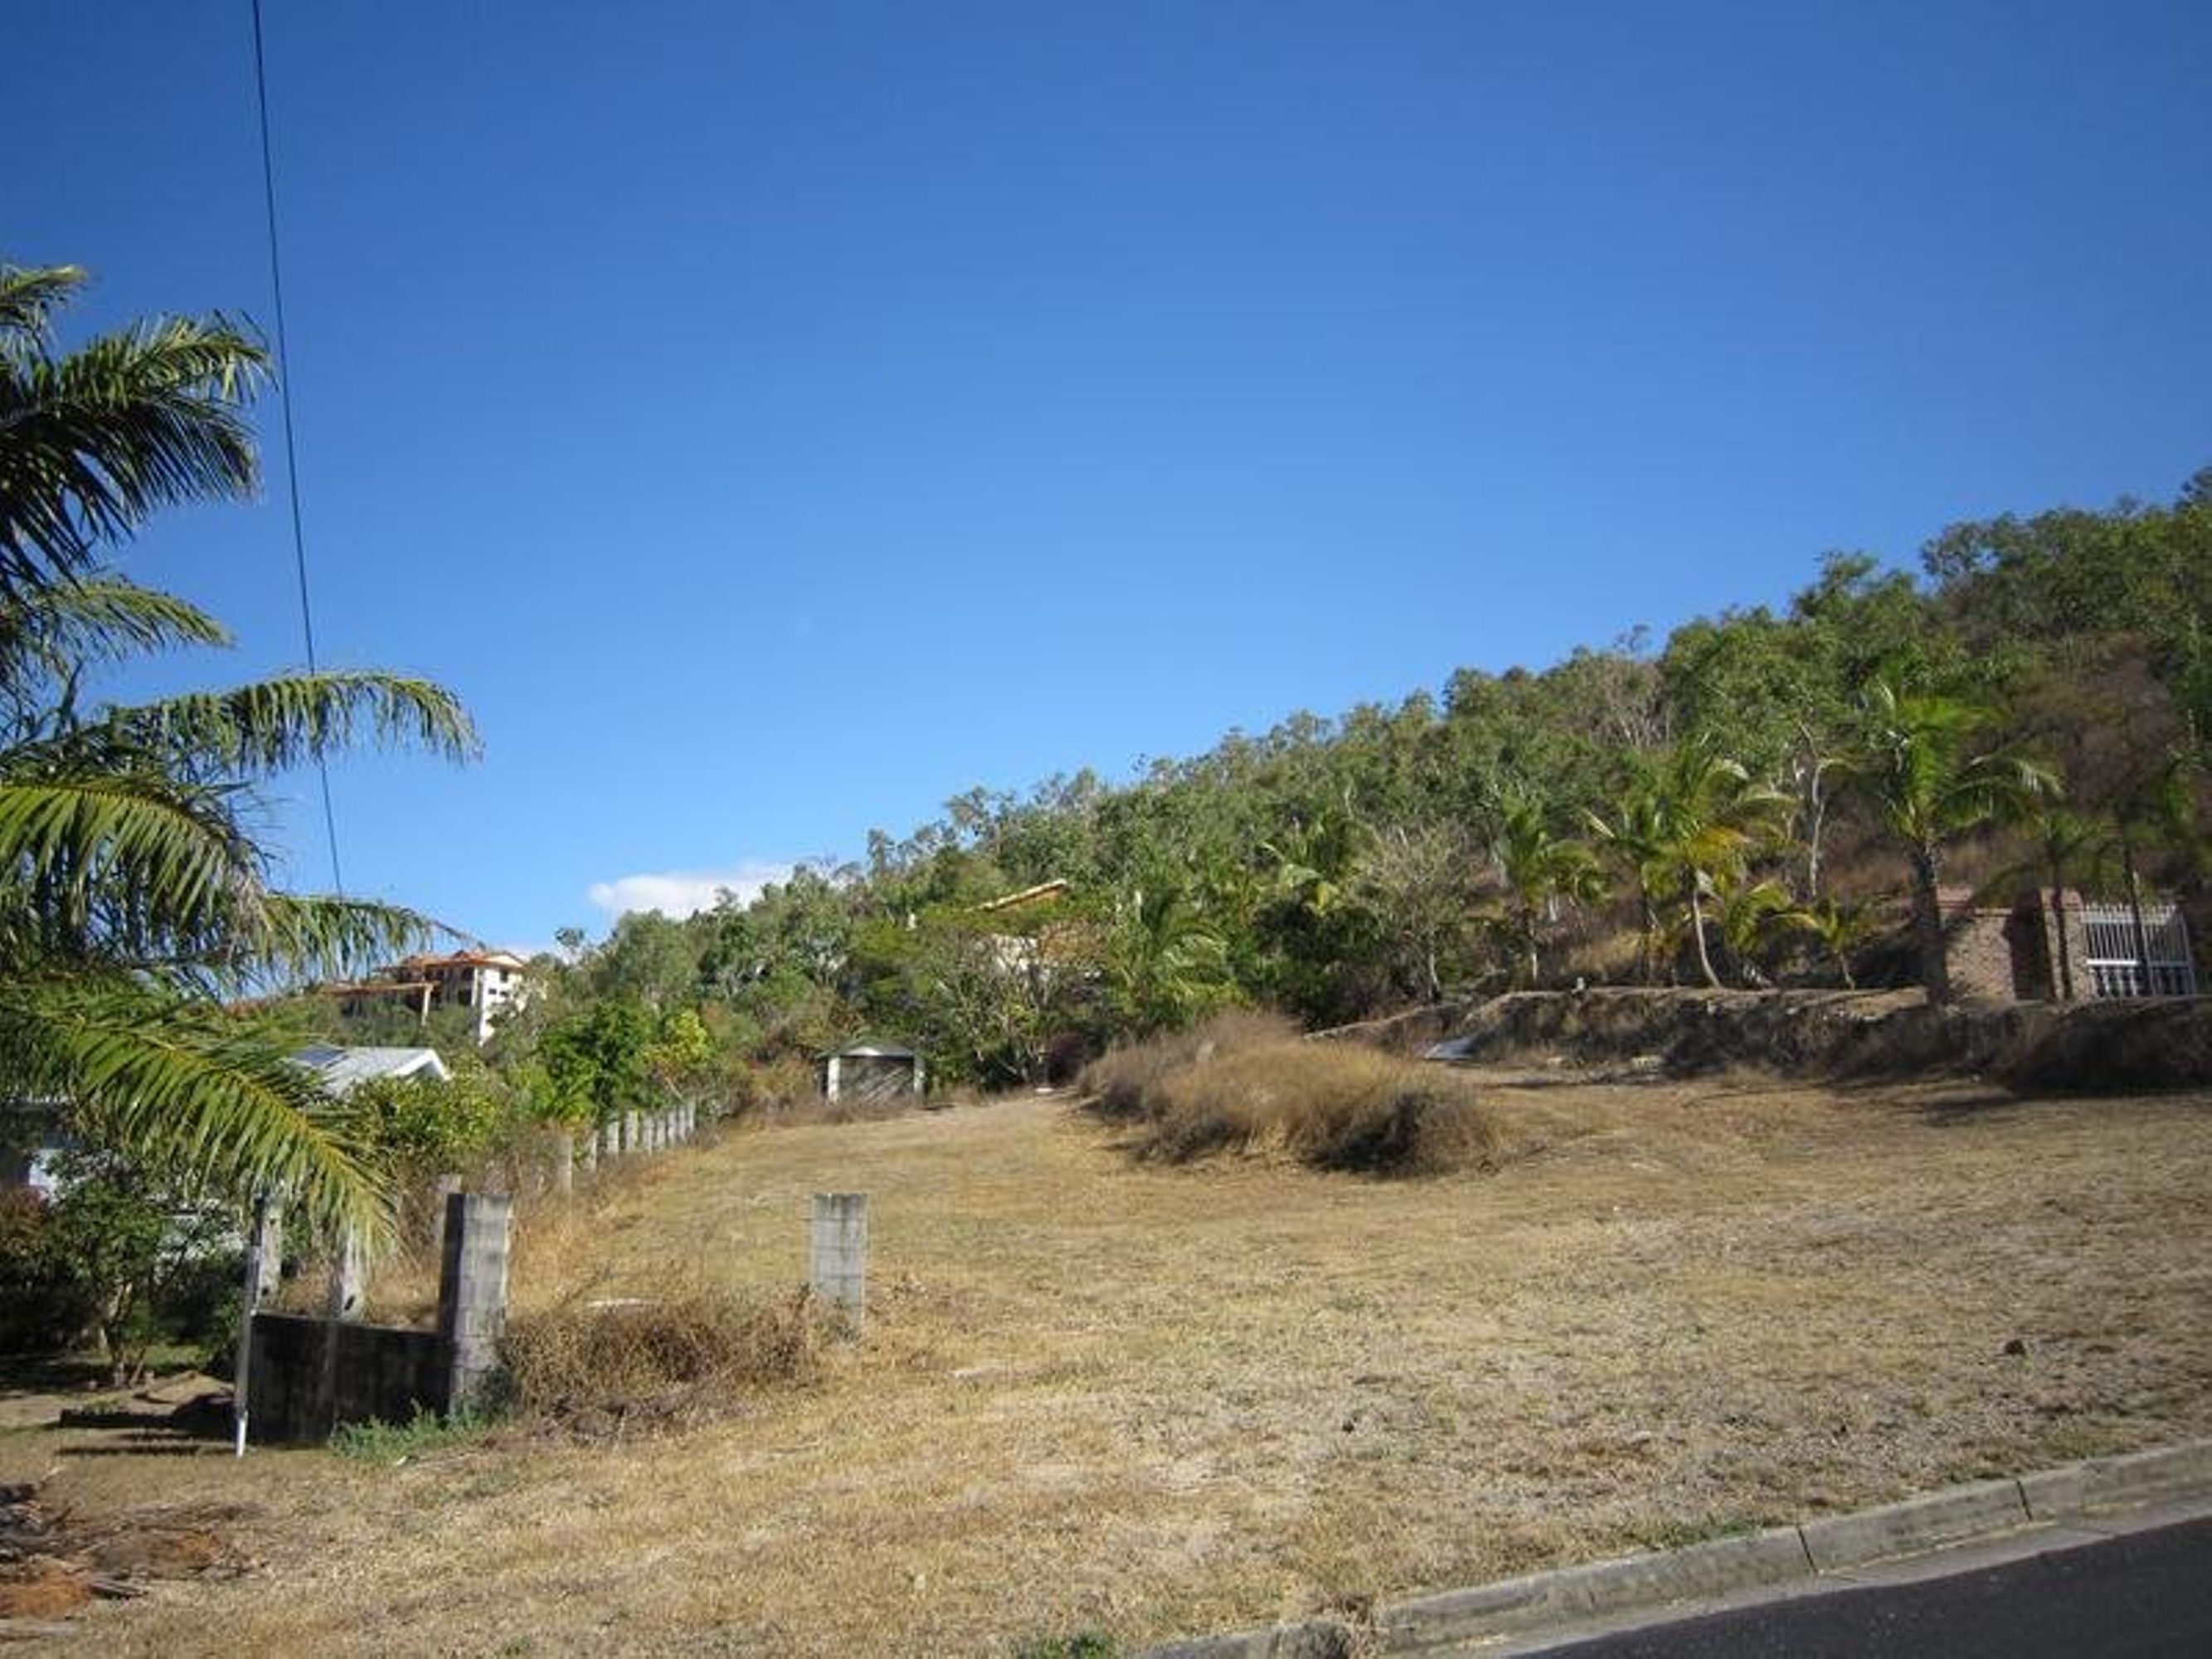 18 Oolilpa St, Mount Louisa QLD 4814, Australia , Vacant Land for Sale - FN First National Real ...